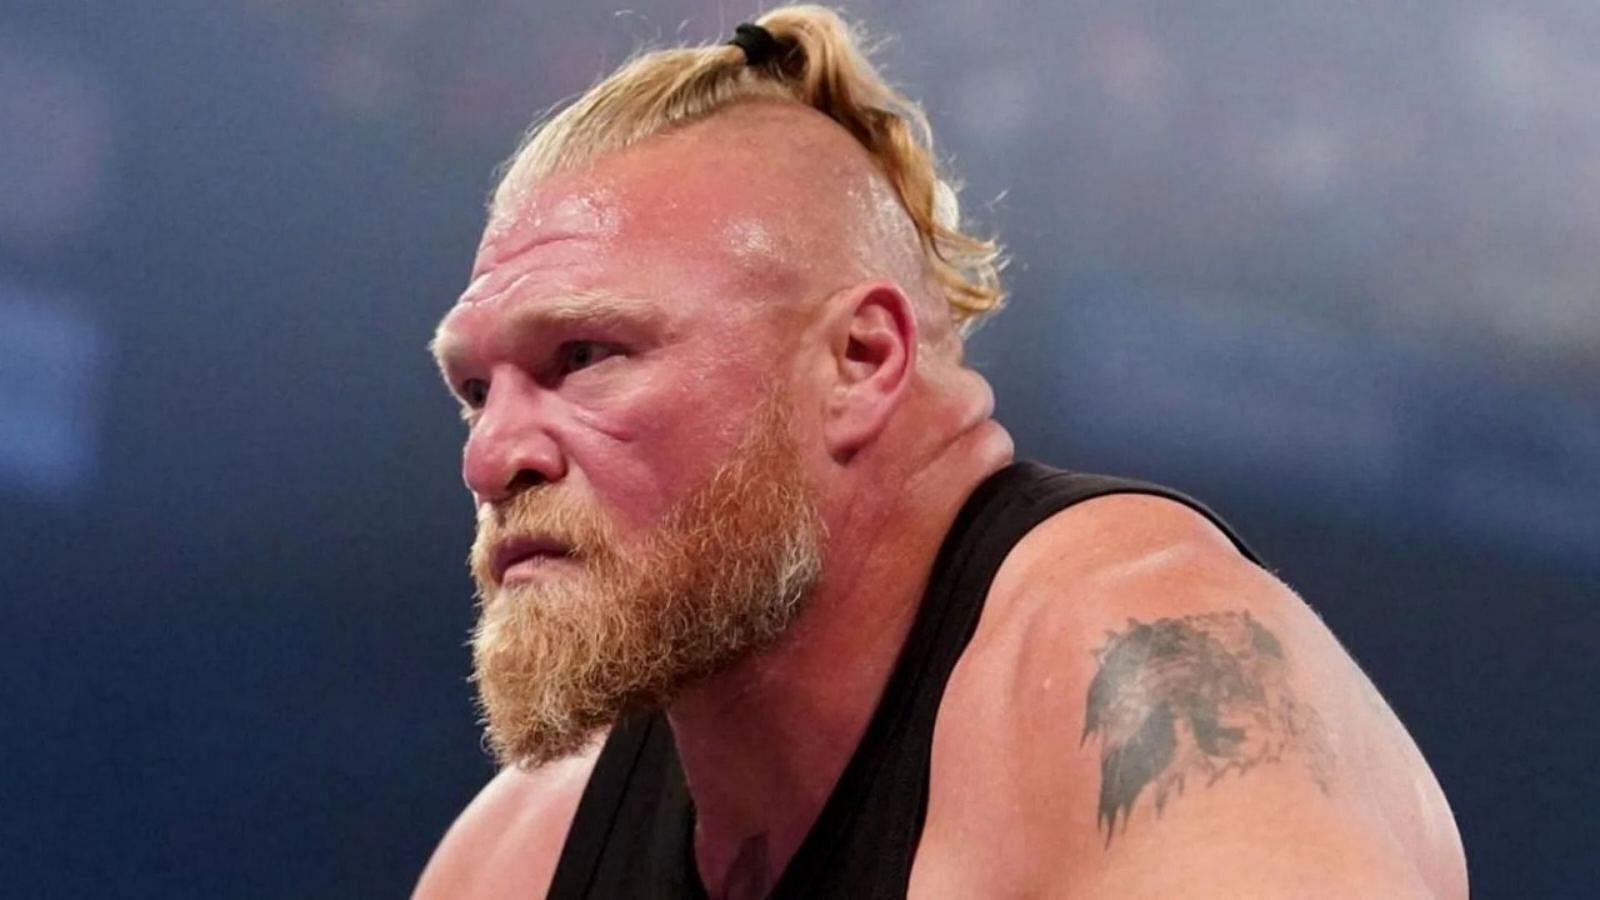 Former WWE Champion says he has "unfinished business" with Brock Lesnar